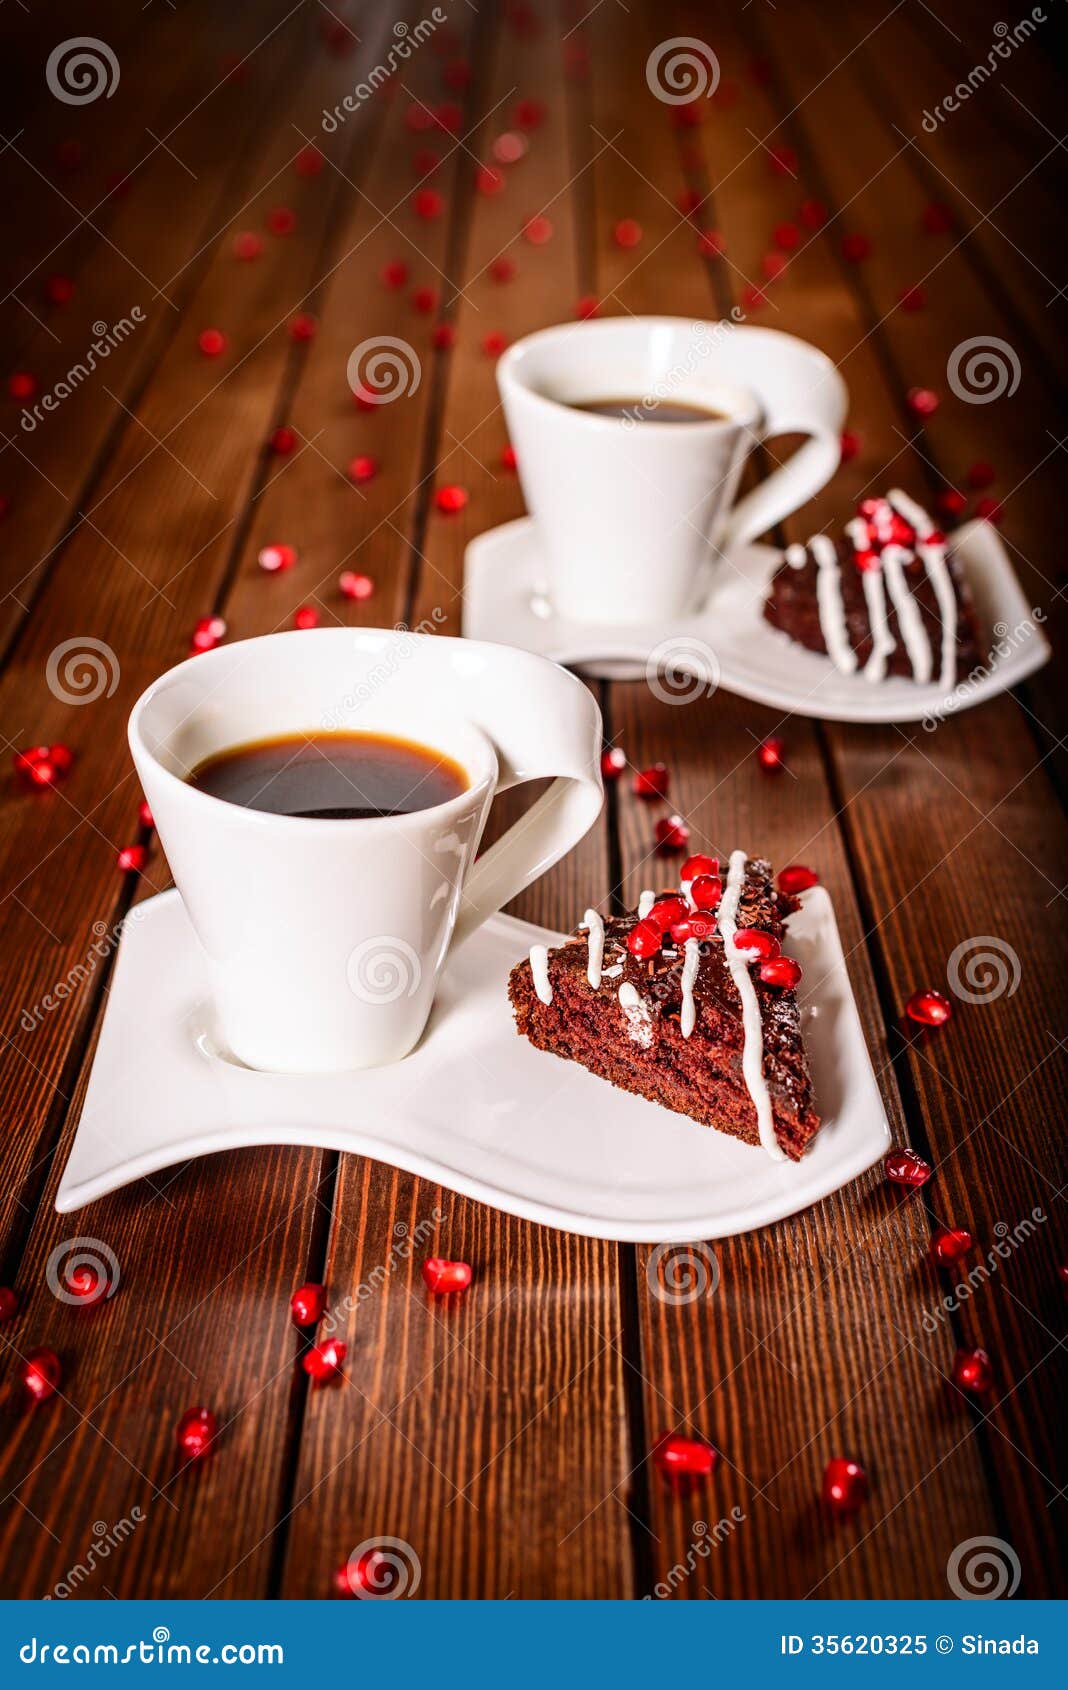 Christmas Chocolate Cake Dessert With Pomegranate And ...